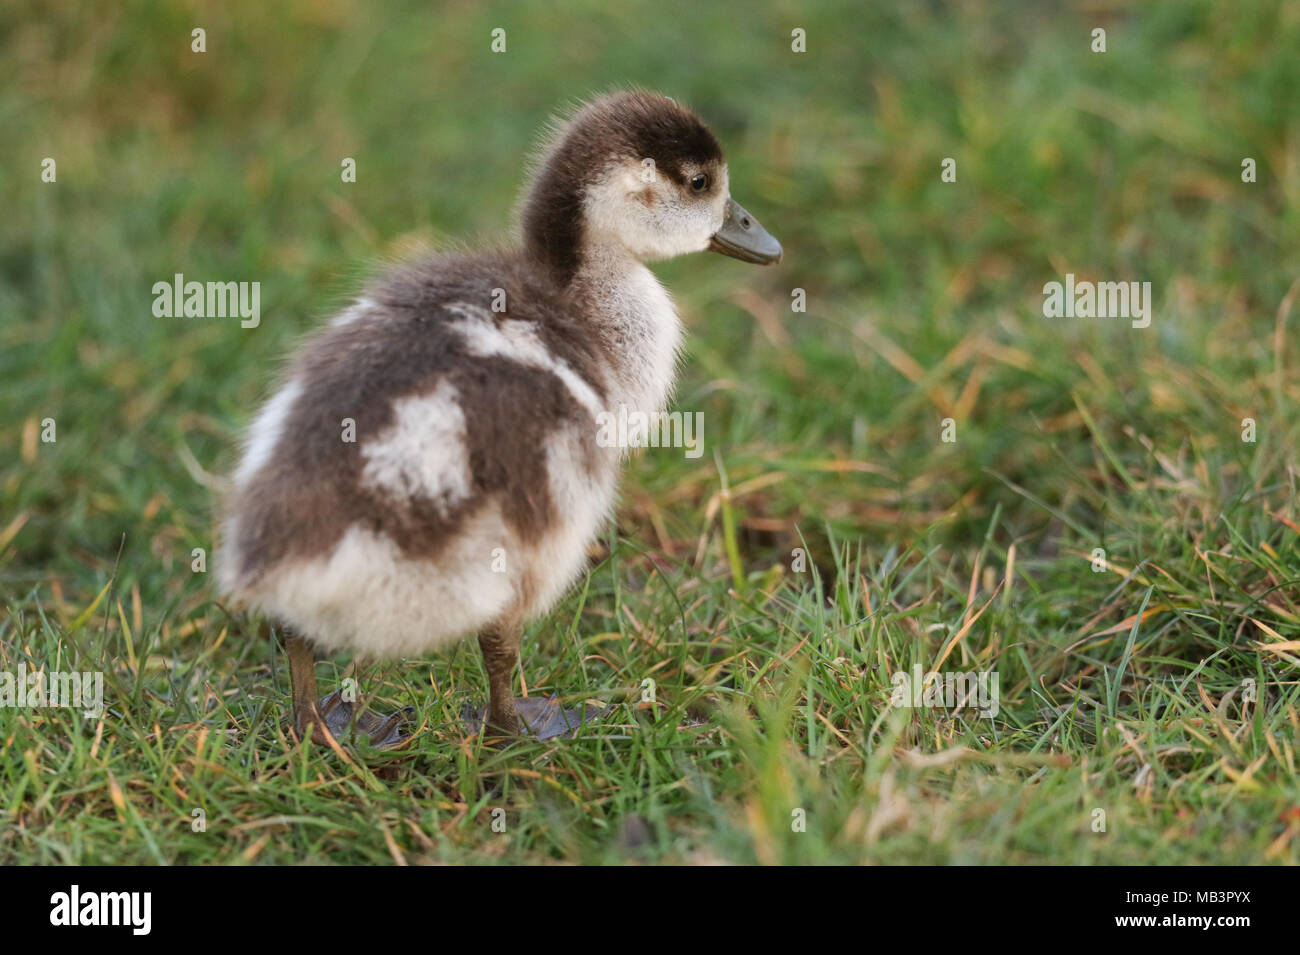 A cute baby Egyptian Goose (Alopochen aegyptiaca) searching for food in a grassy field. Stock Photo